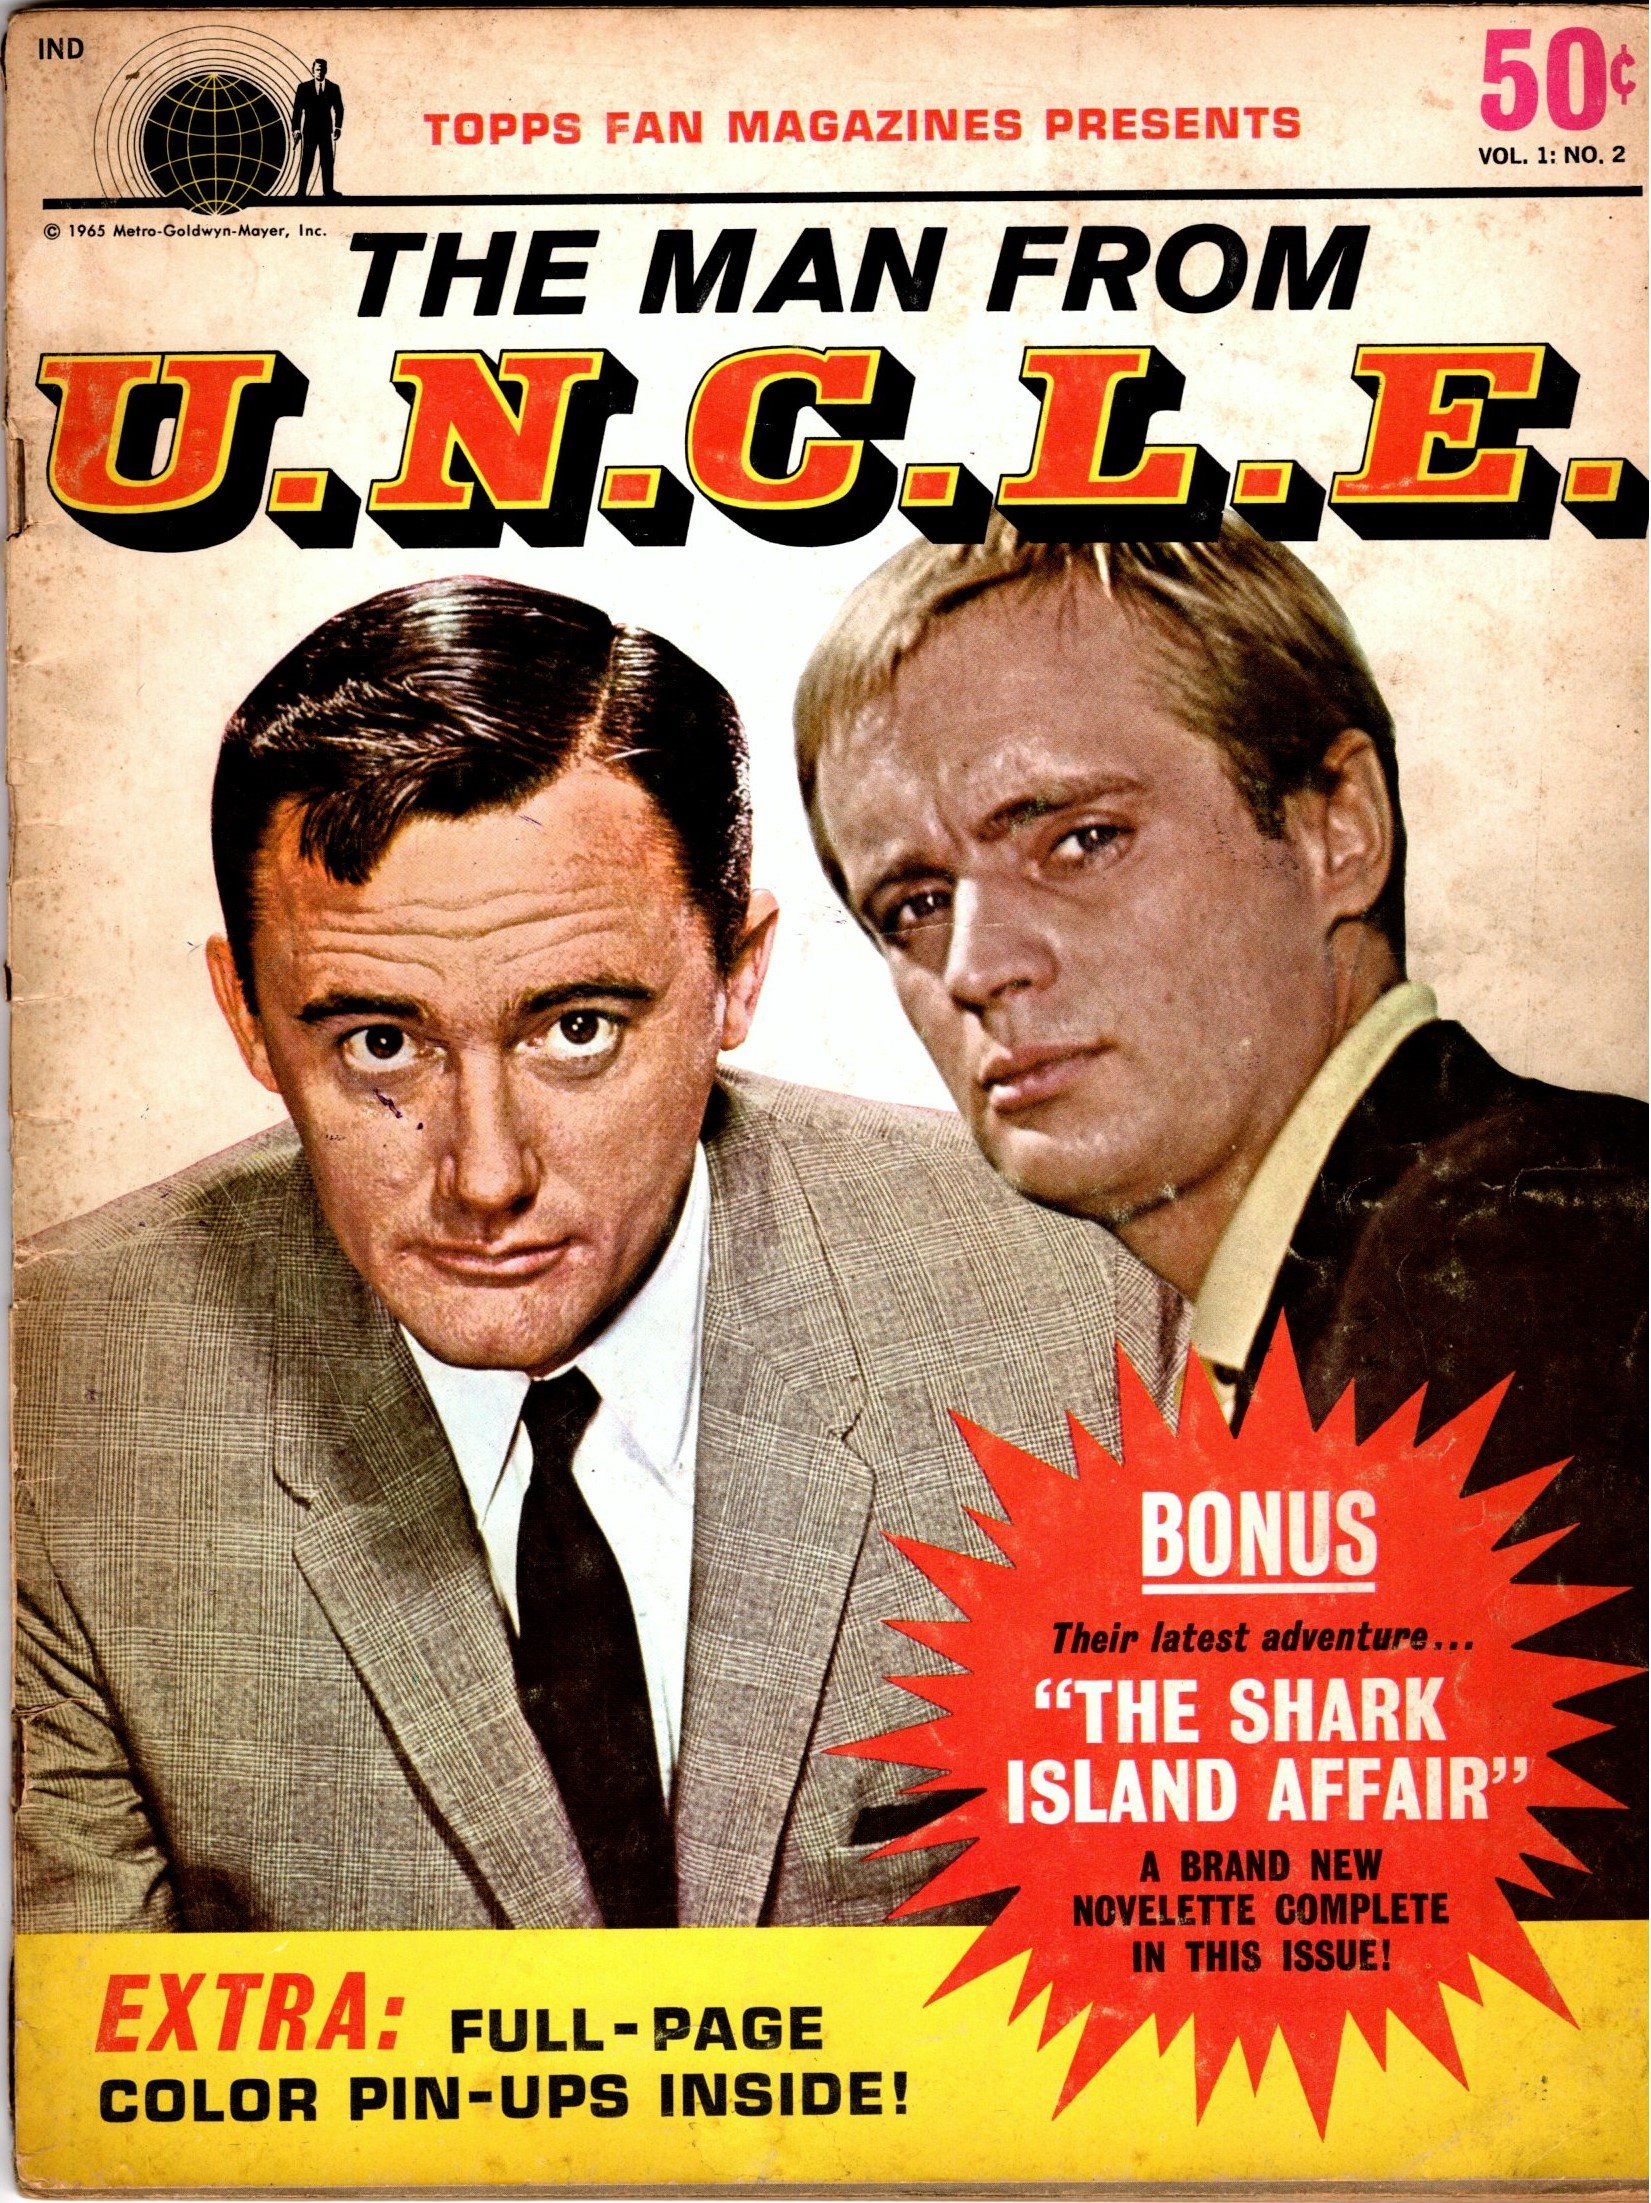 Image for Topps Presents the Man from U. N. C. L. E. :  Volume 1, Number 2, 1965, Featuring the Shark Island Affair